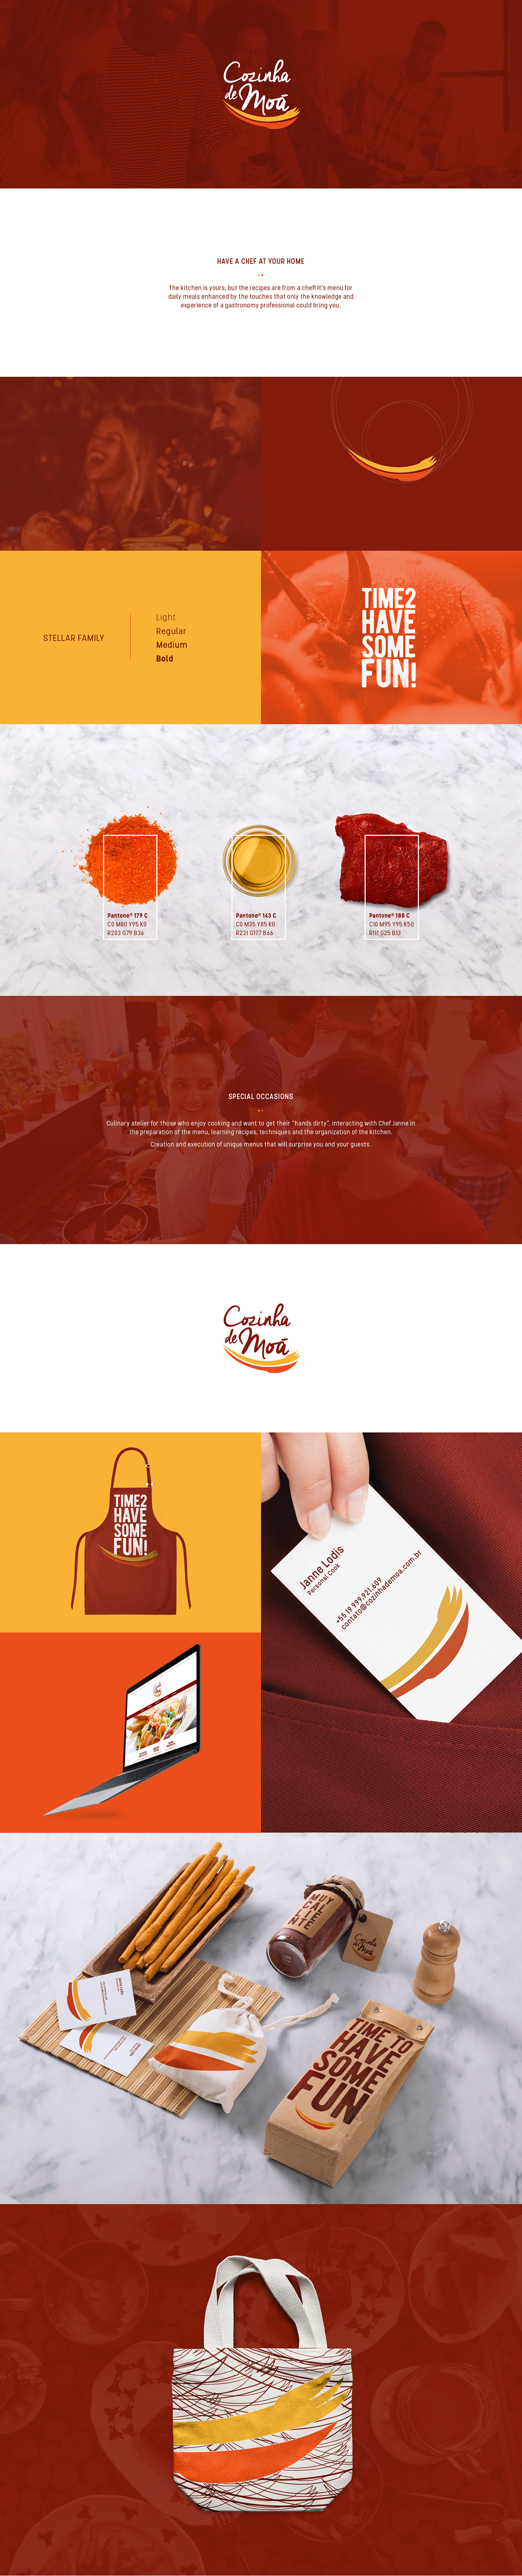 logo brand Food  cook personal chef Trifolded visual identity